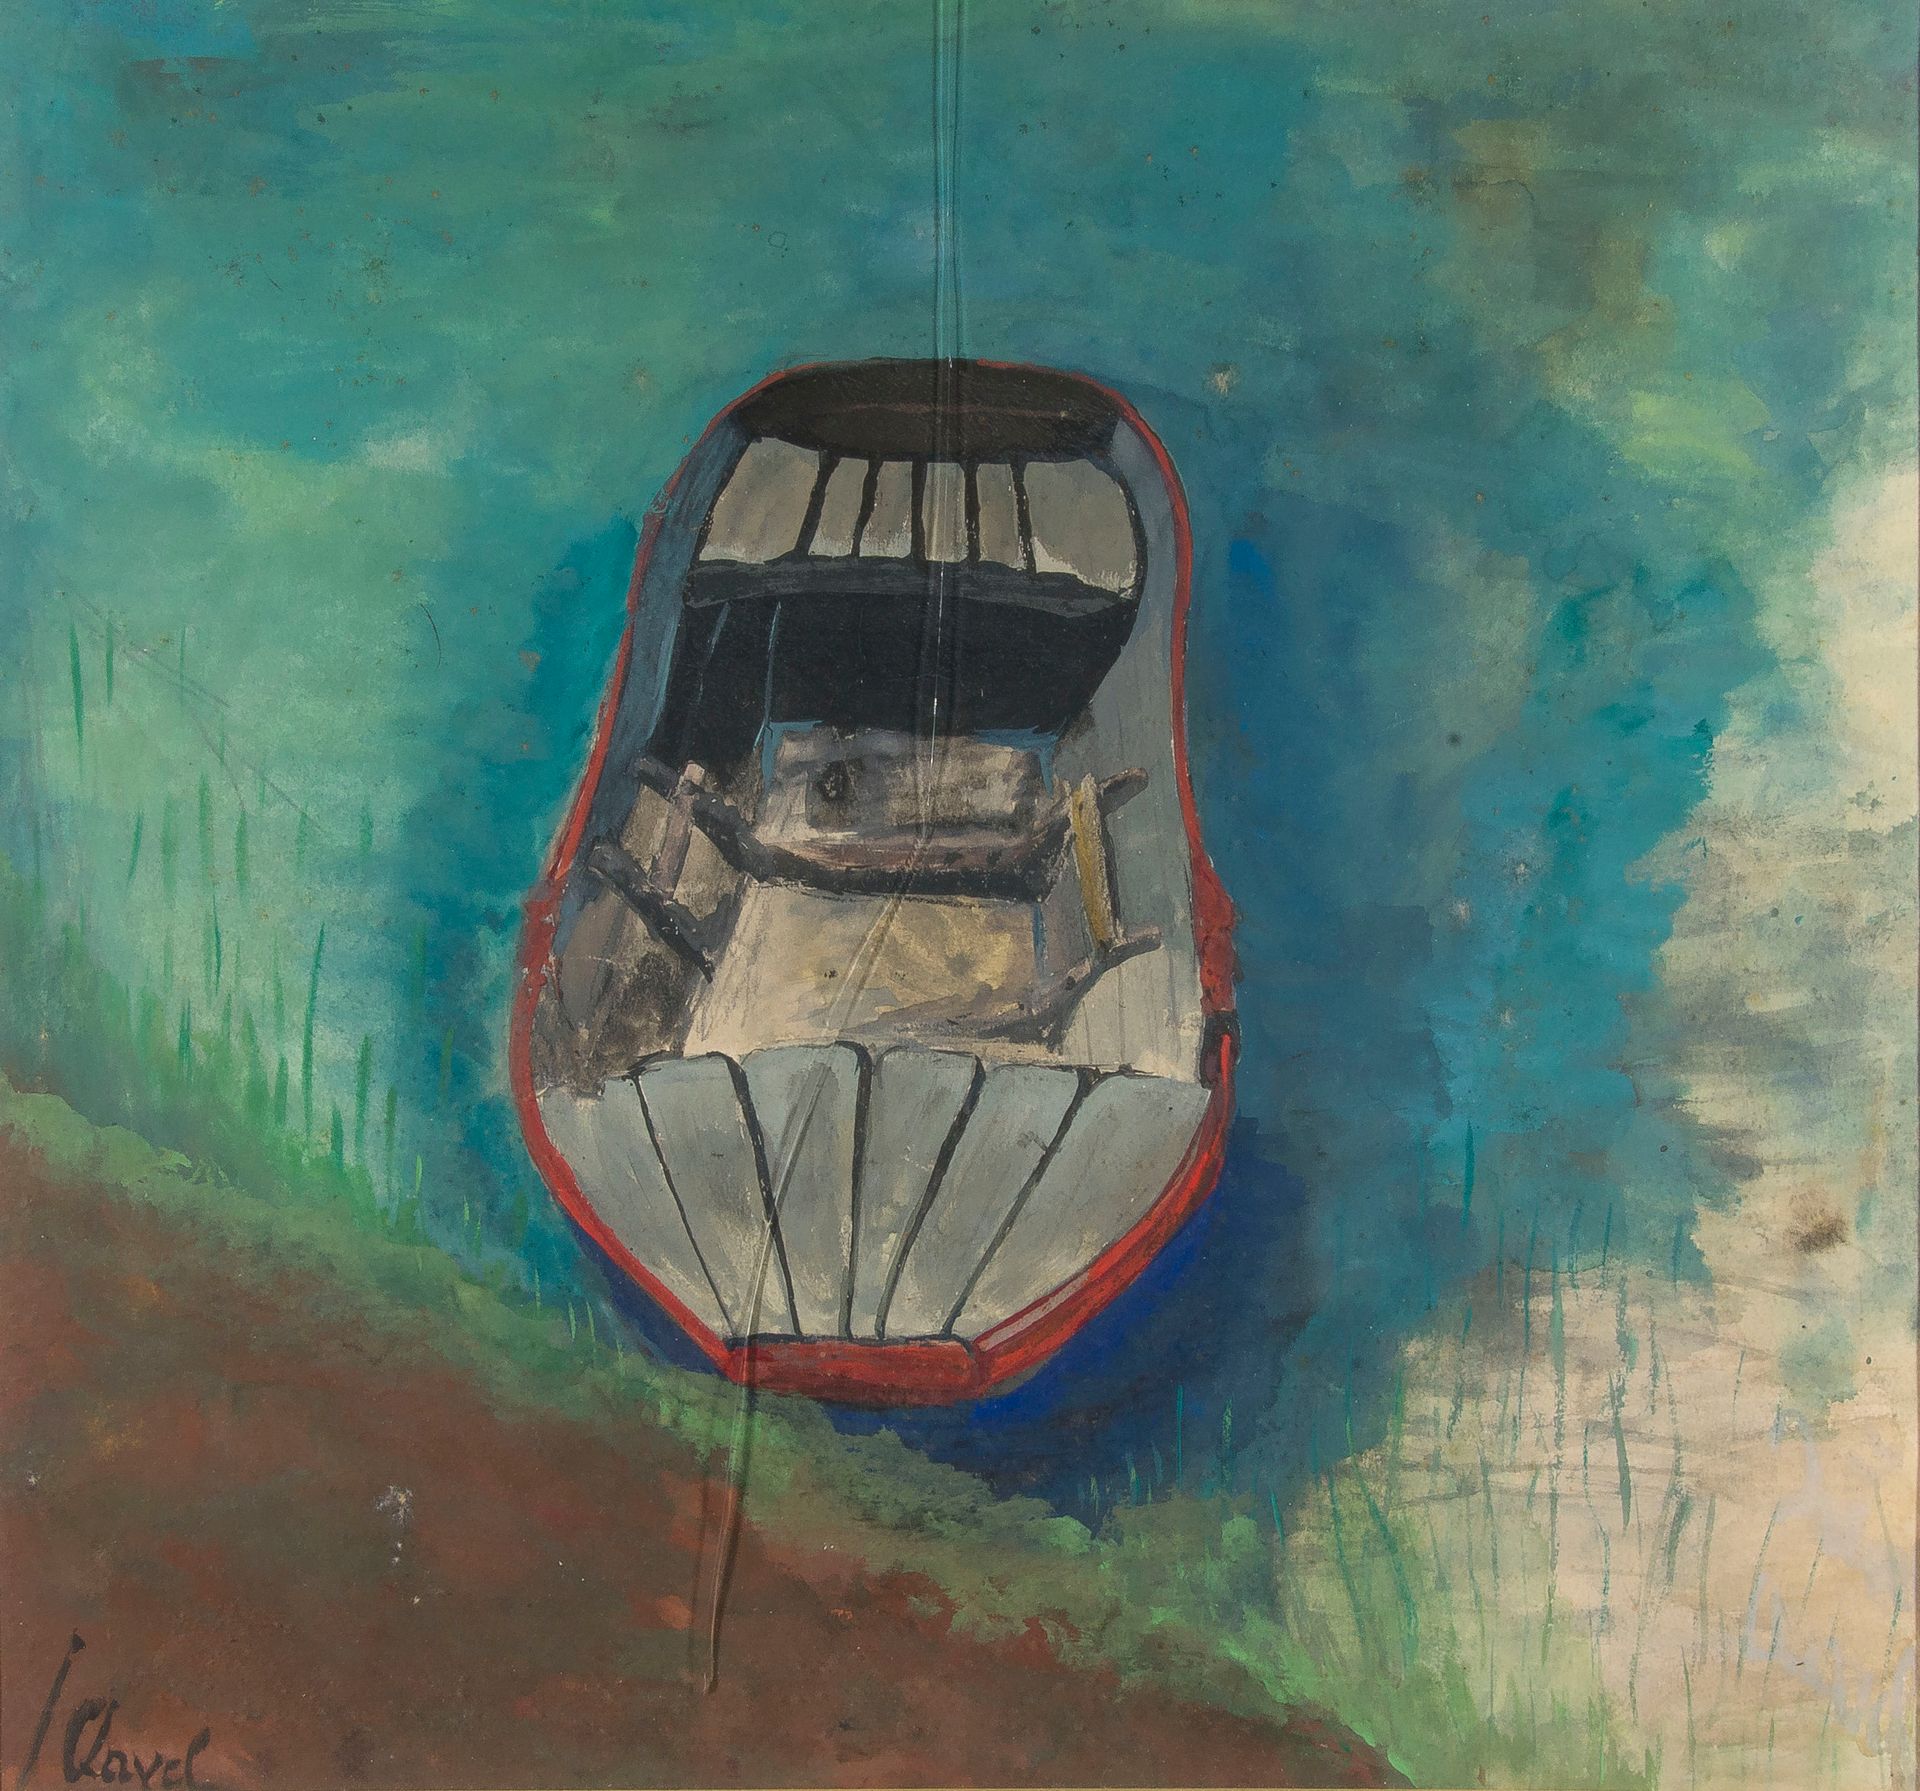 CLAVEL, Boat

Gouache and watercolour on paper signed lower left

31,5 x 34 cm